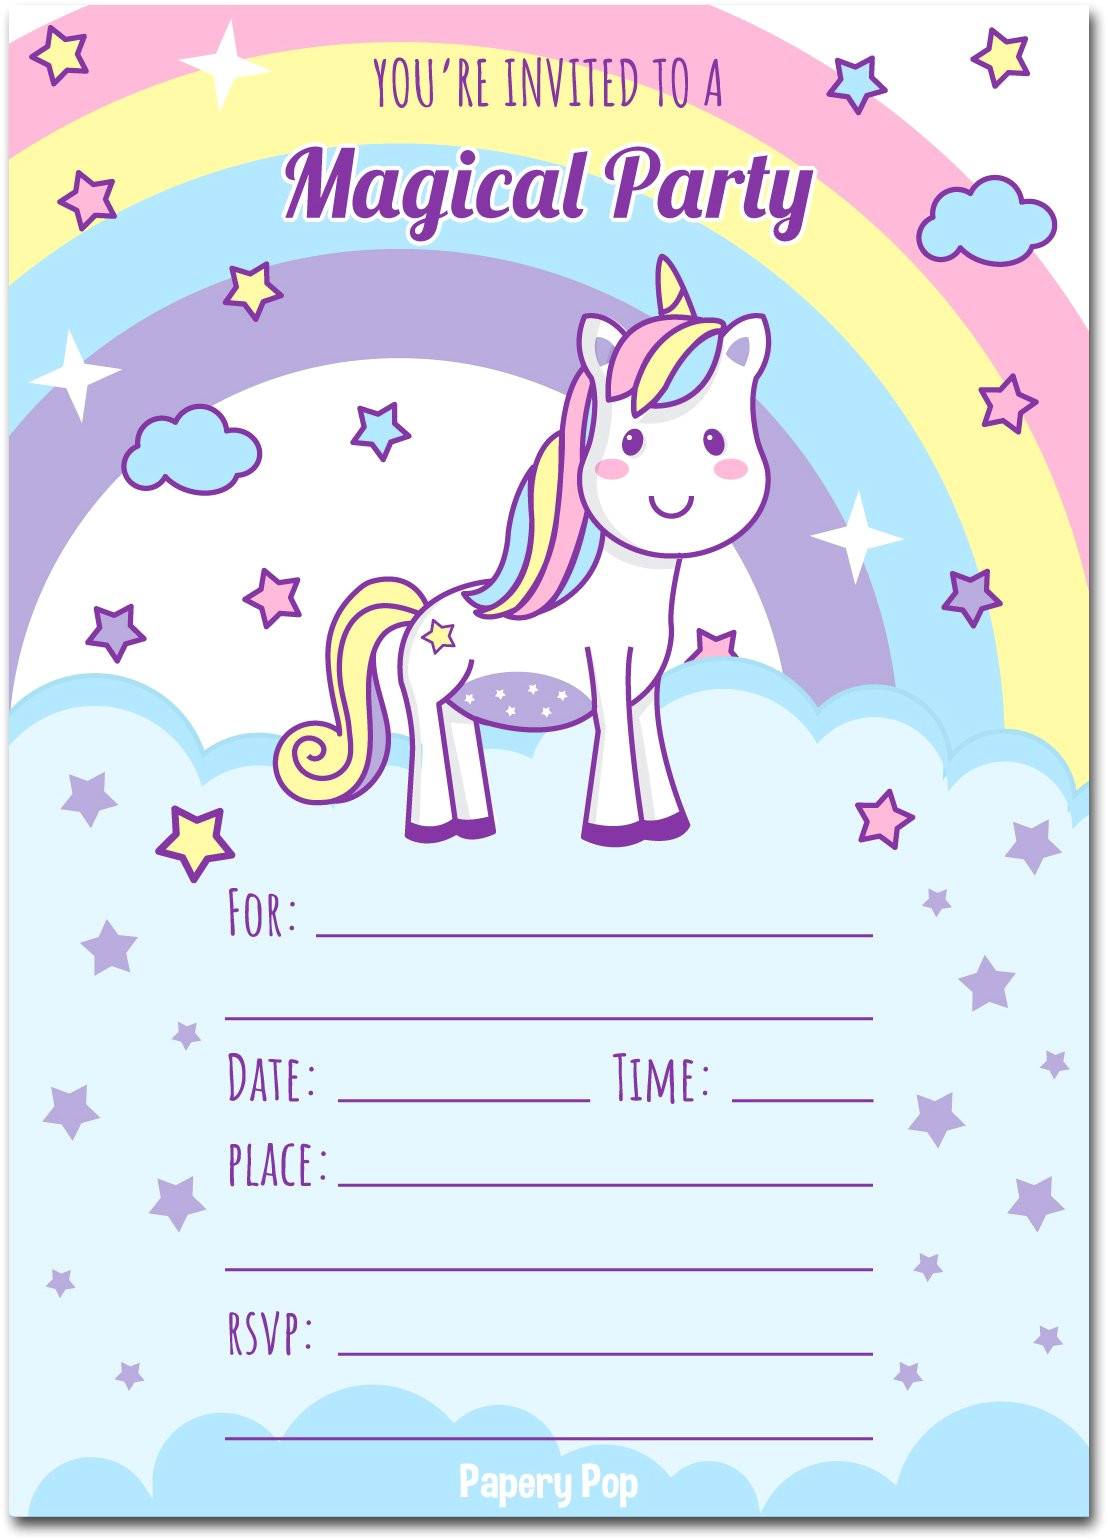 30 unicorn birthday invitations with envelopes kids magical birthday party invitations for girls